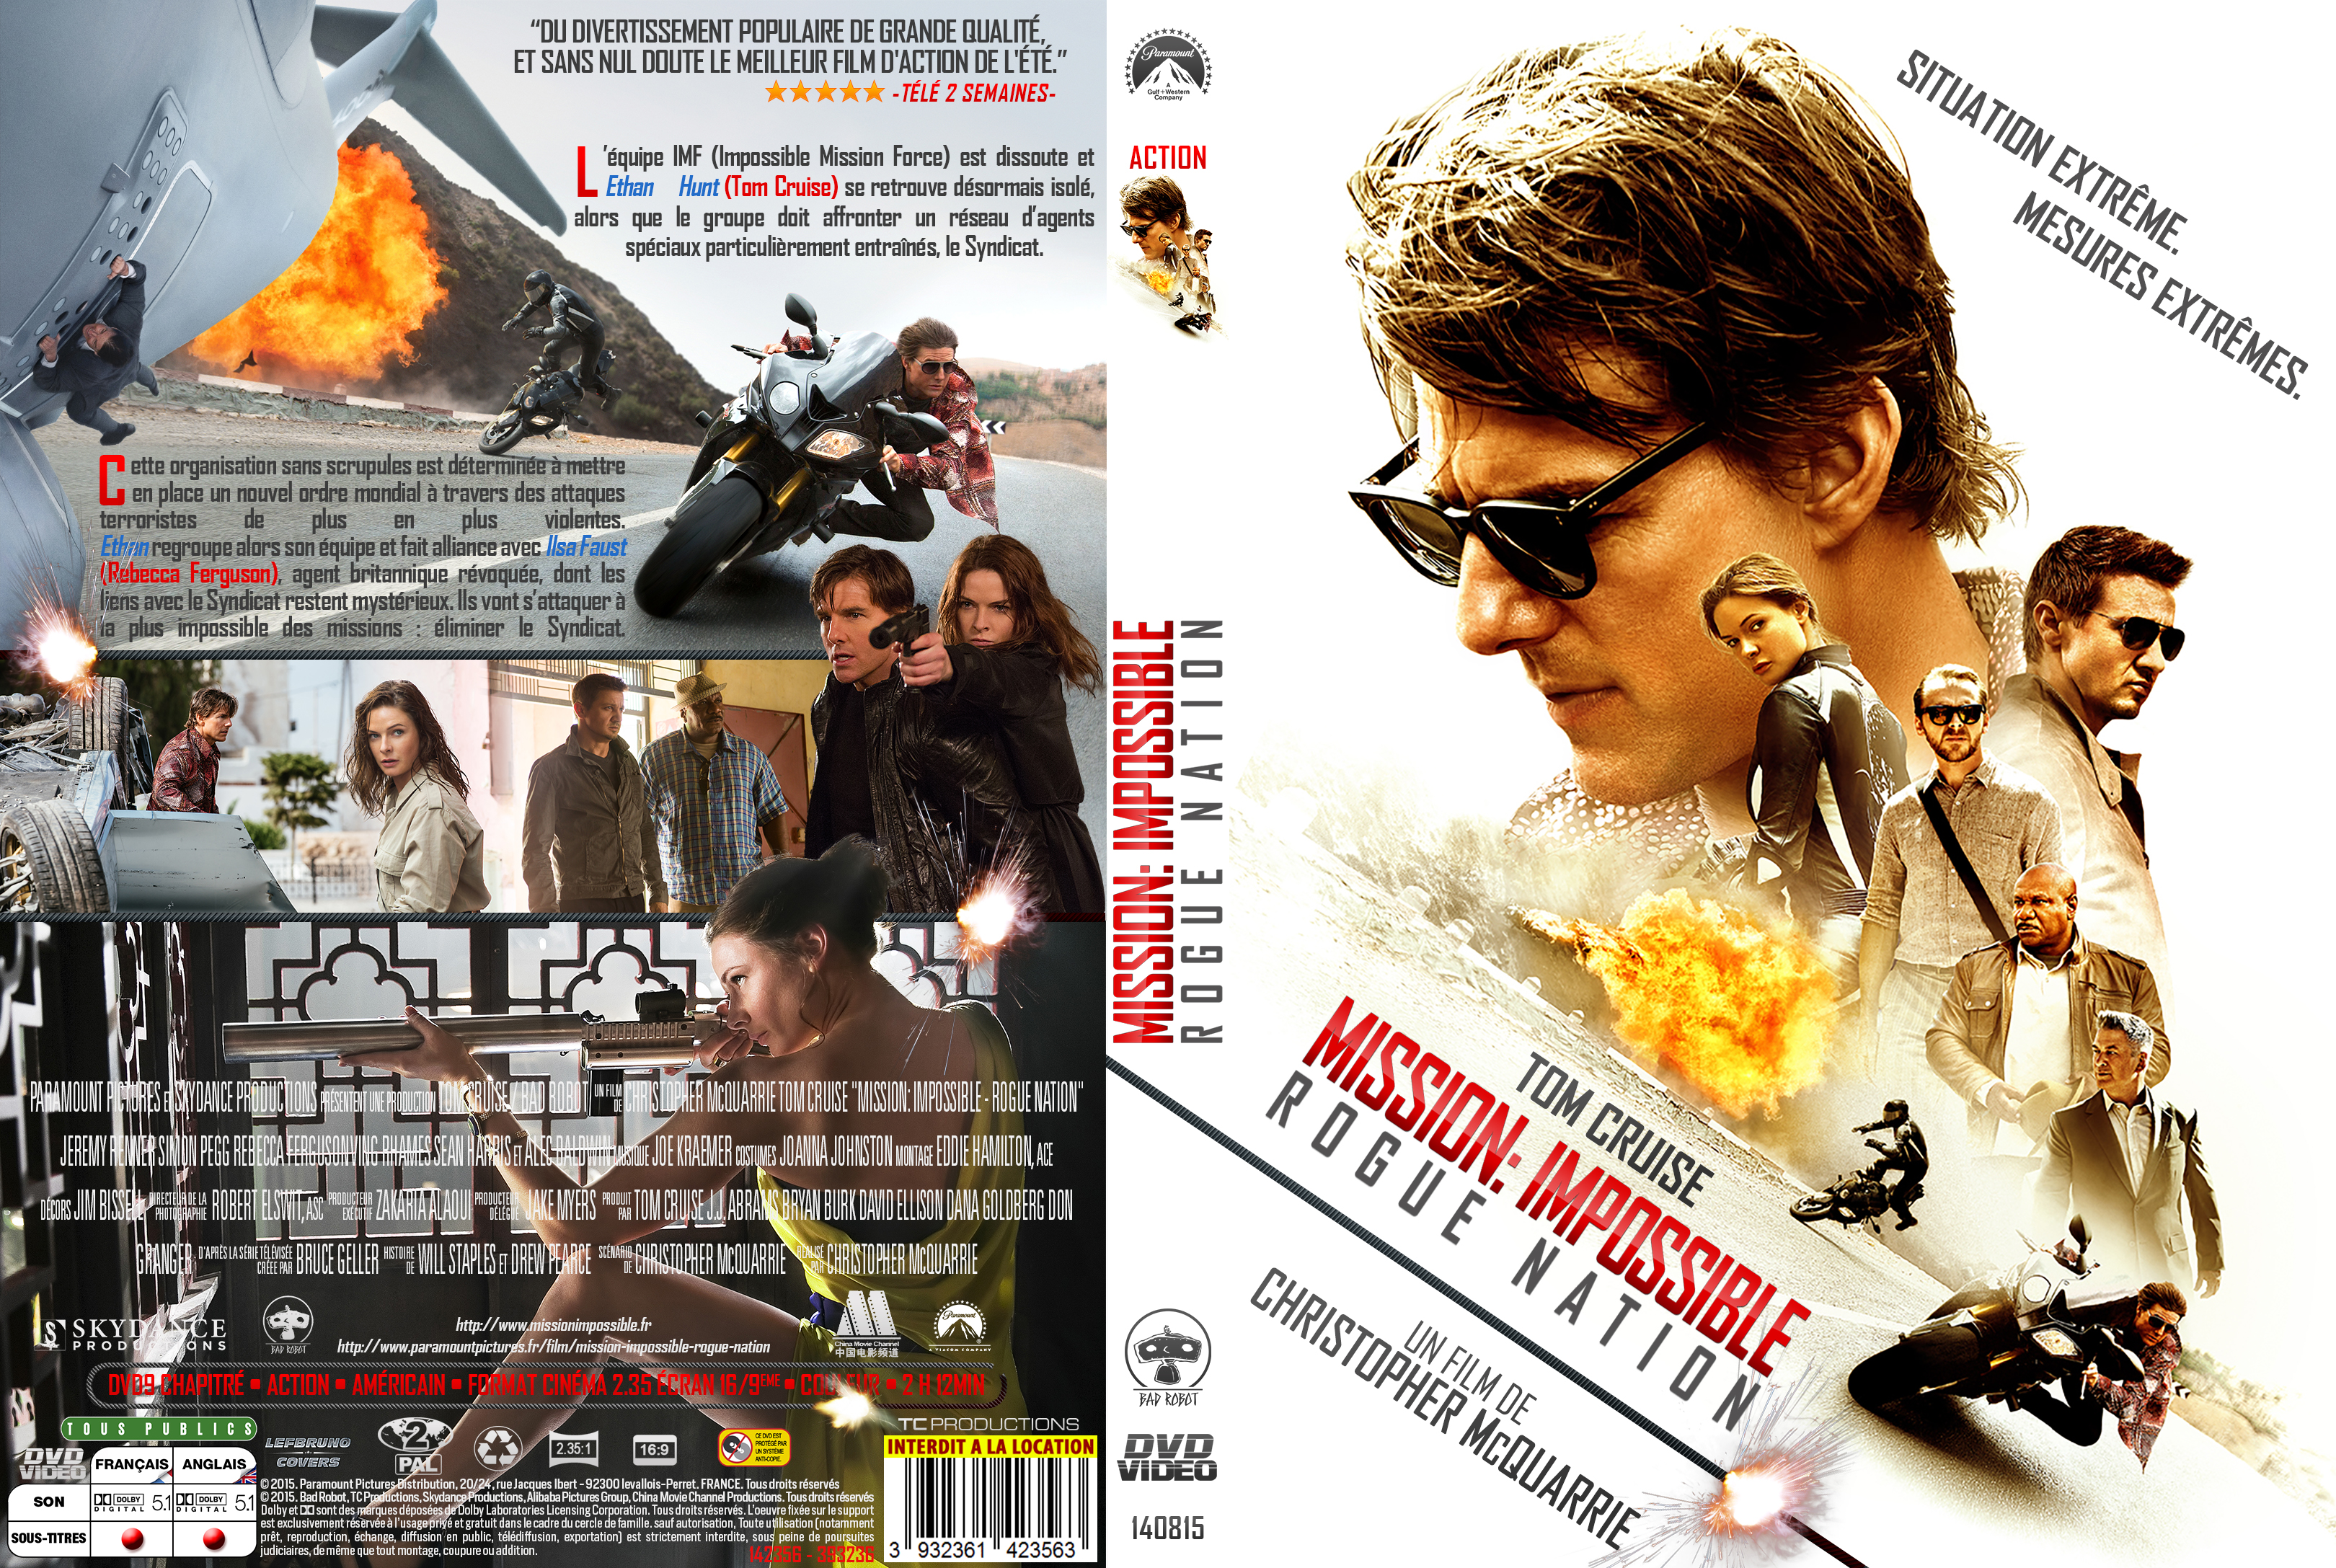 Jaquette DVD Mission : Impossible Rogue Nation custom v2